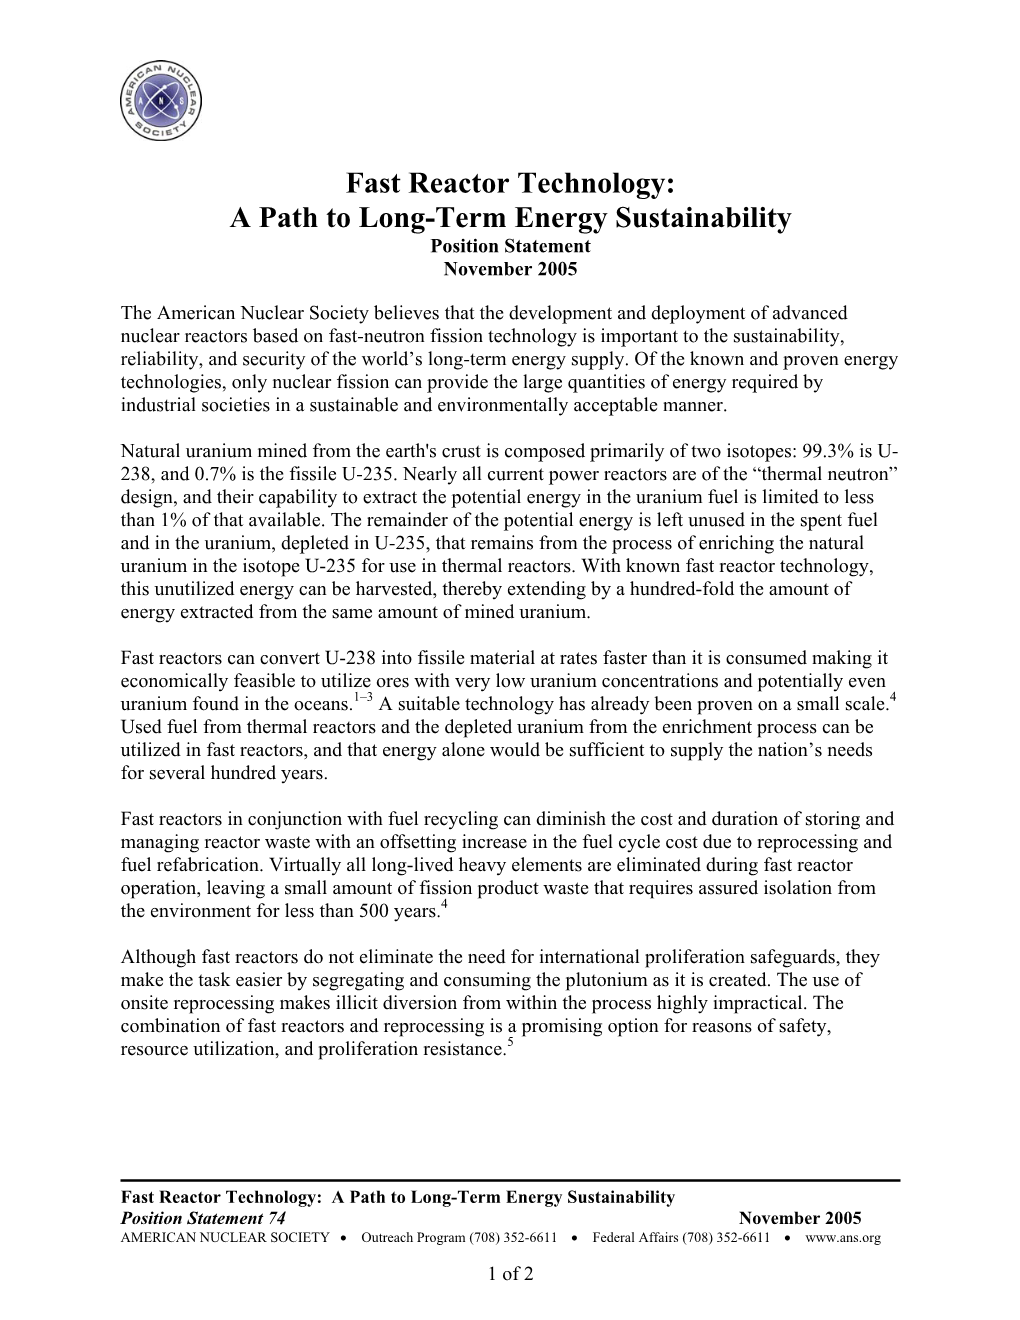 Fast Reactor Technology: a Path to Long-Term Energy Sustainability Position Statement November 2005